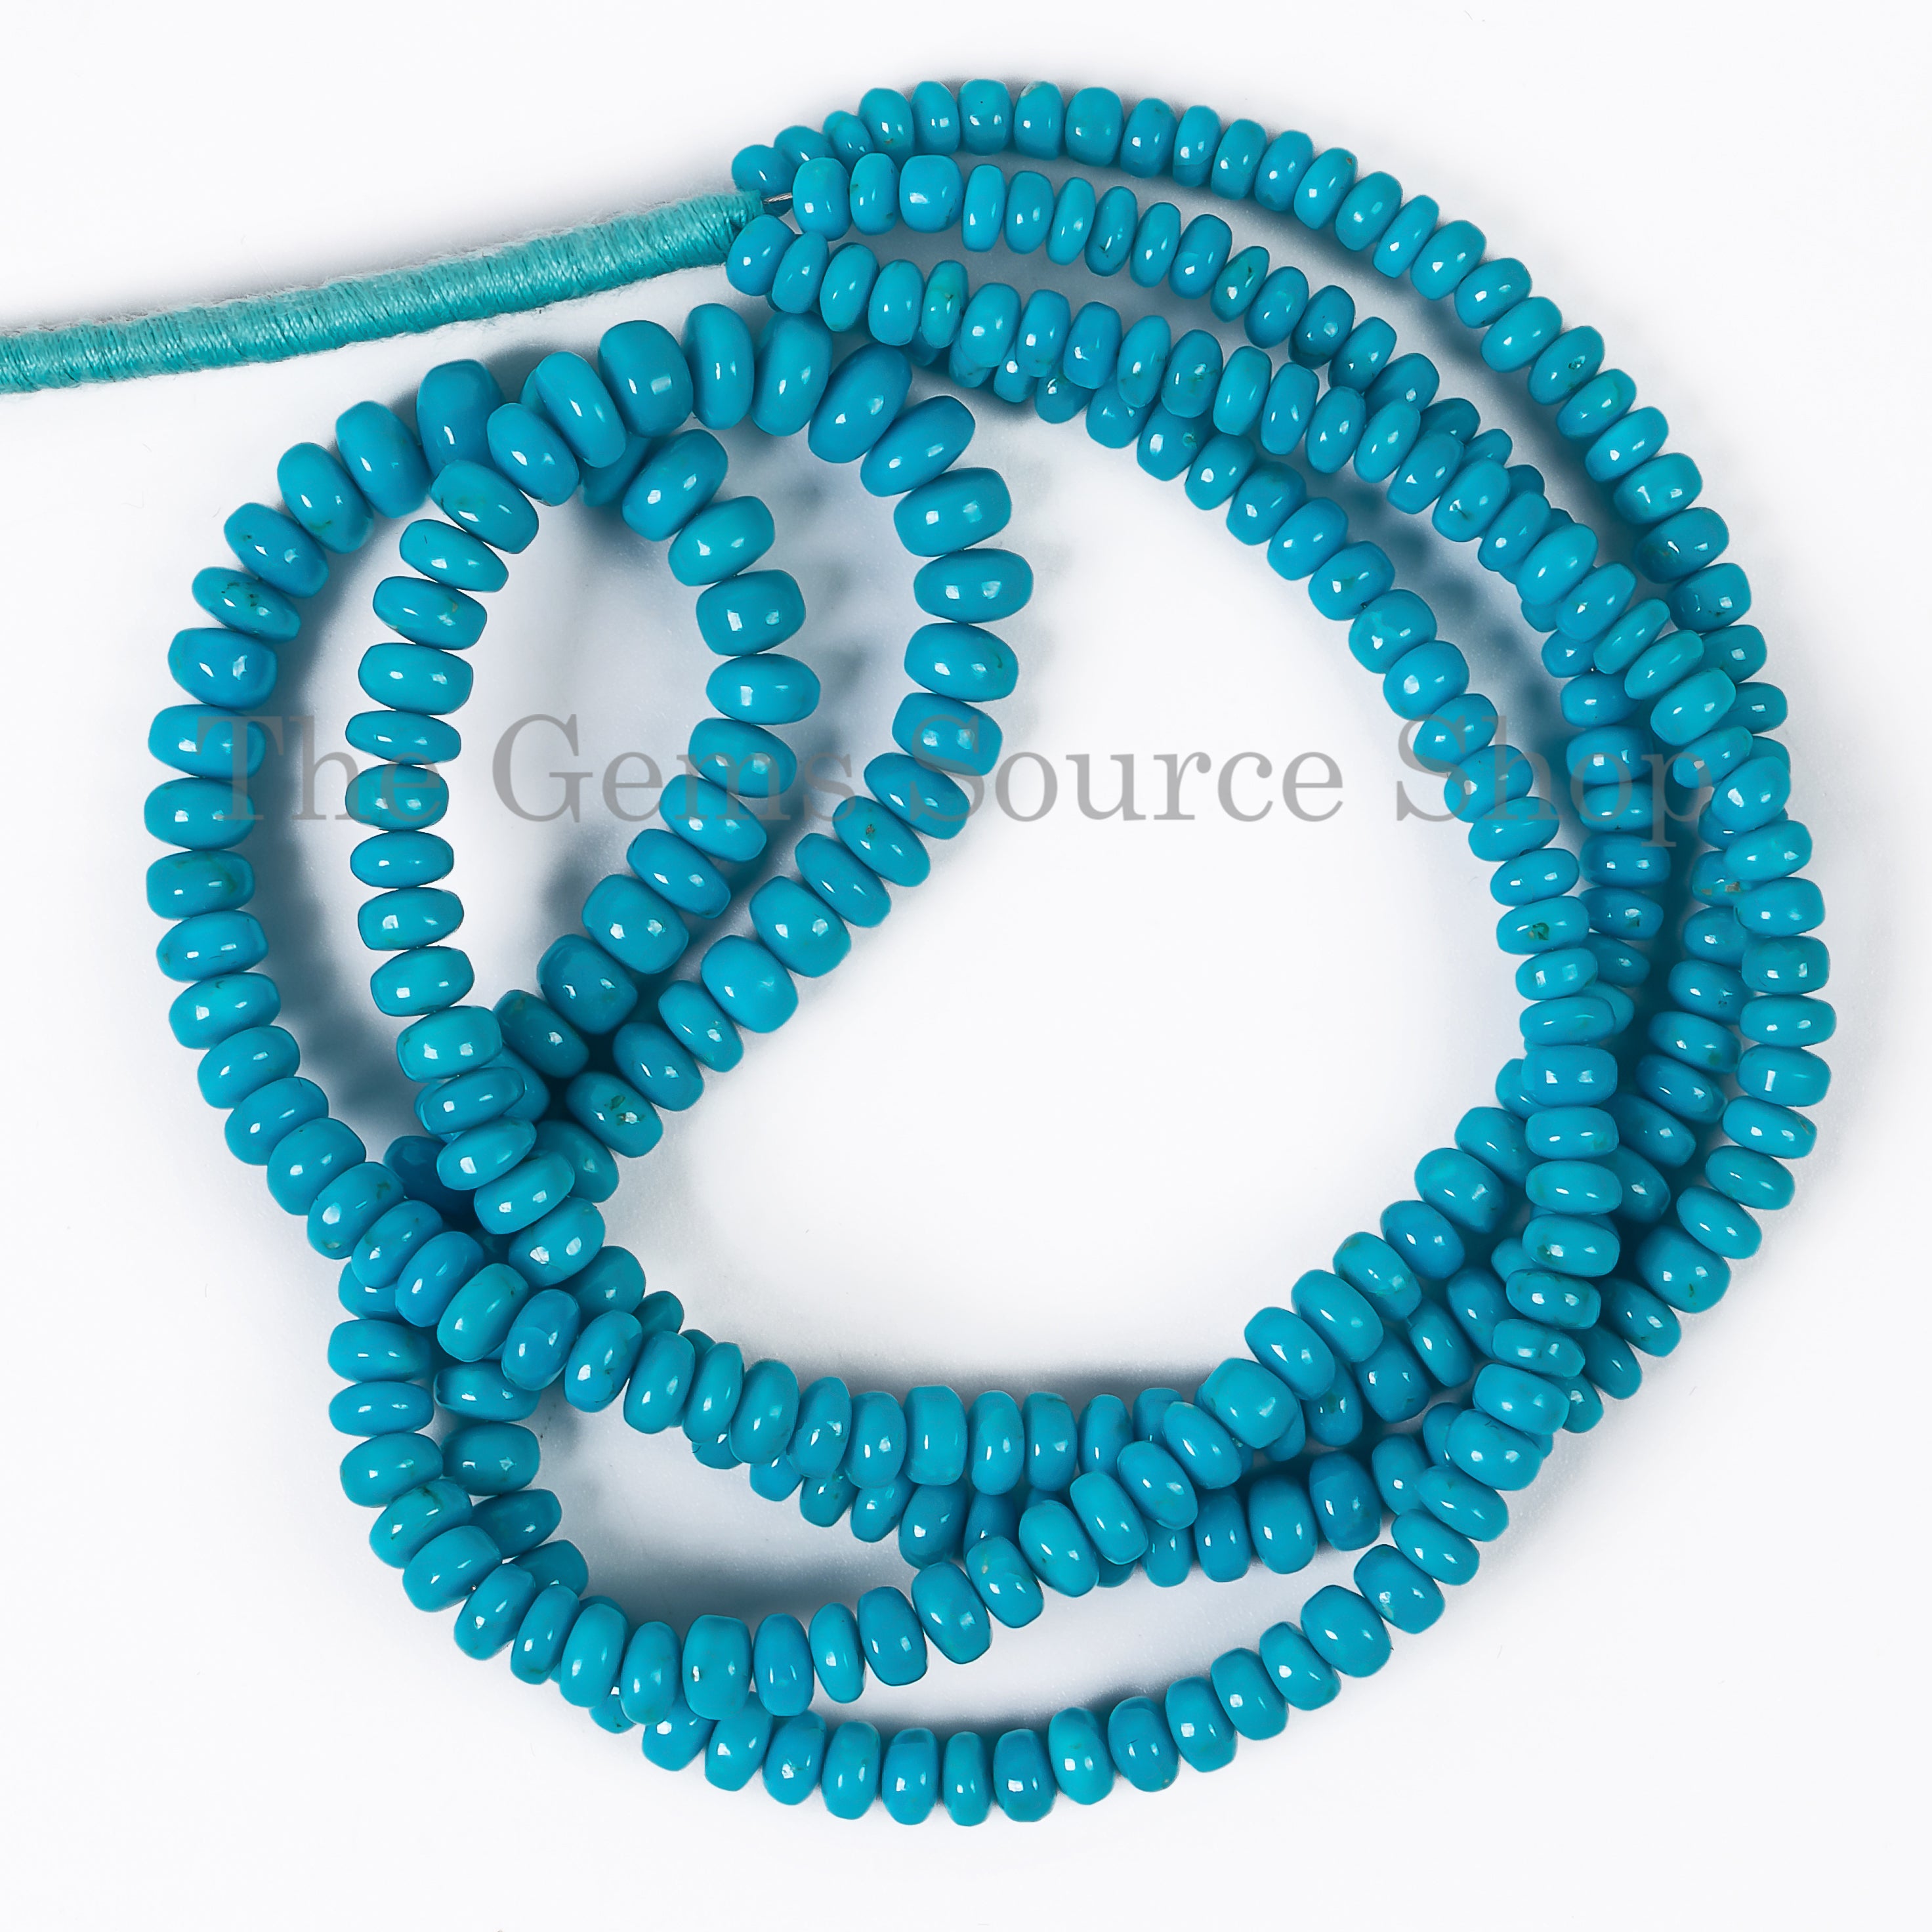 4-6 mm Sleeping Beauty Turquoise Smooth Rondelle Beads TGS-4533